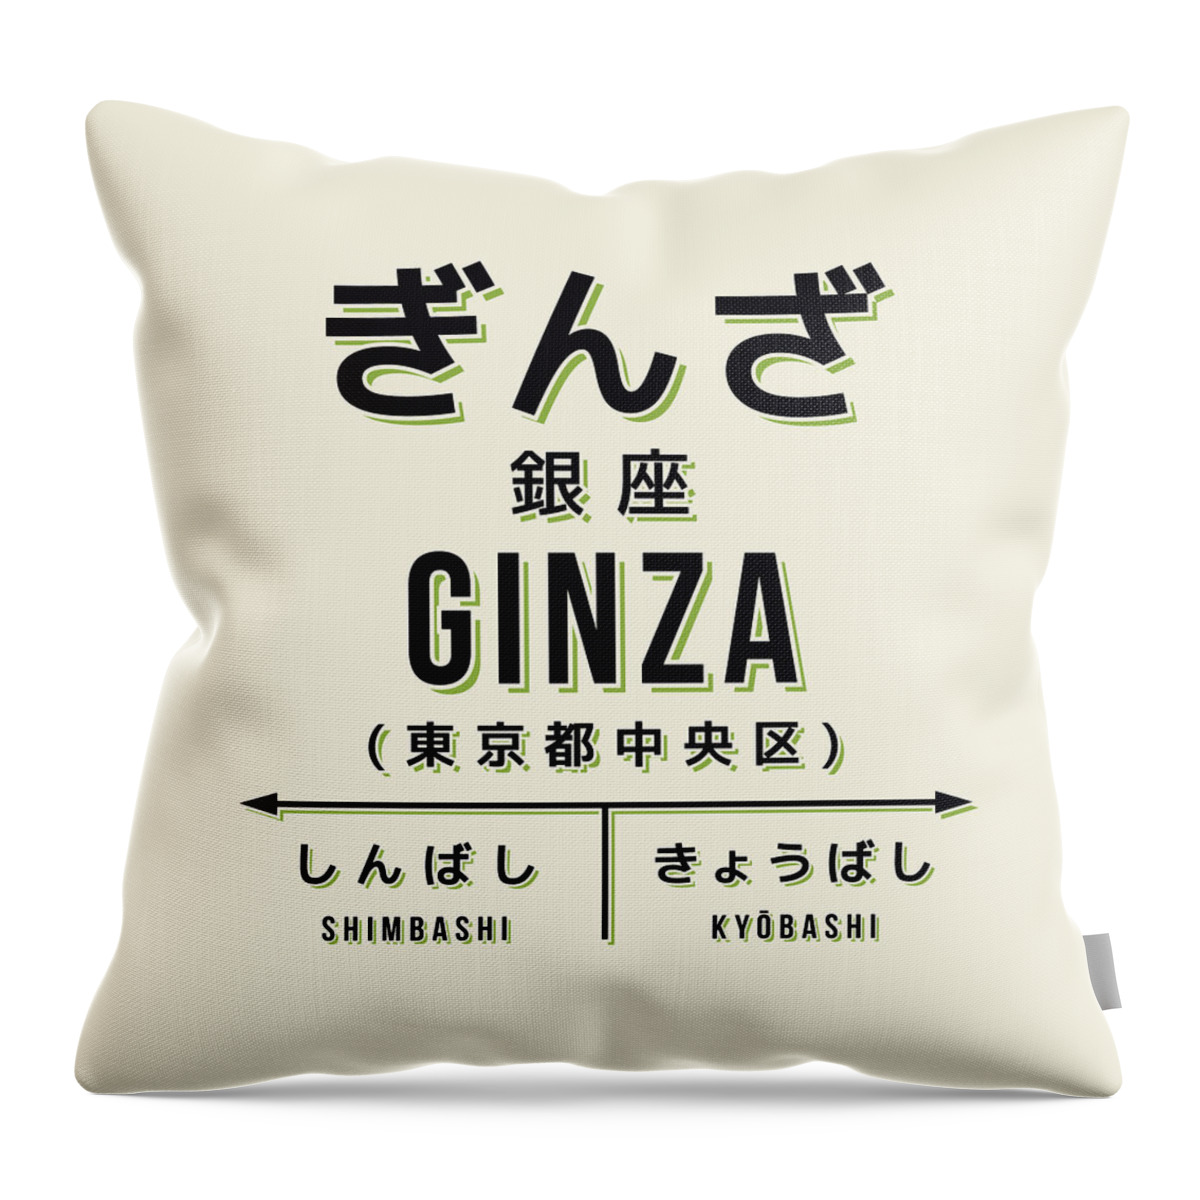 Poster Throw Pillow featuring the digital art Vintage Japan Train Station Sign - Ginza Cream by Organic Synthesis